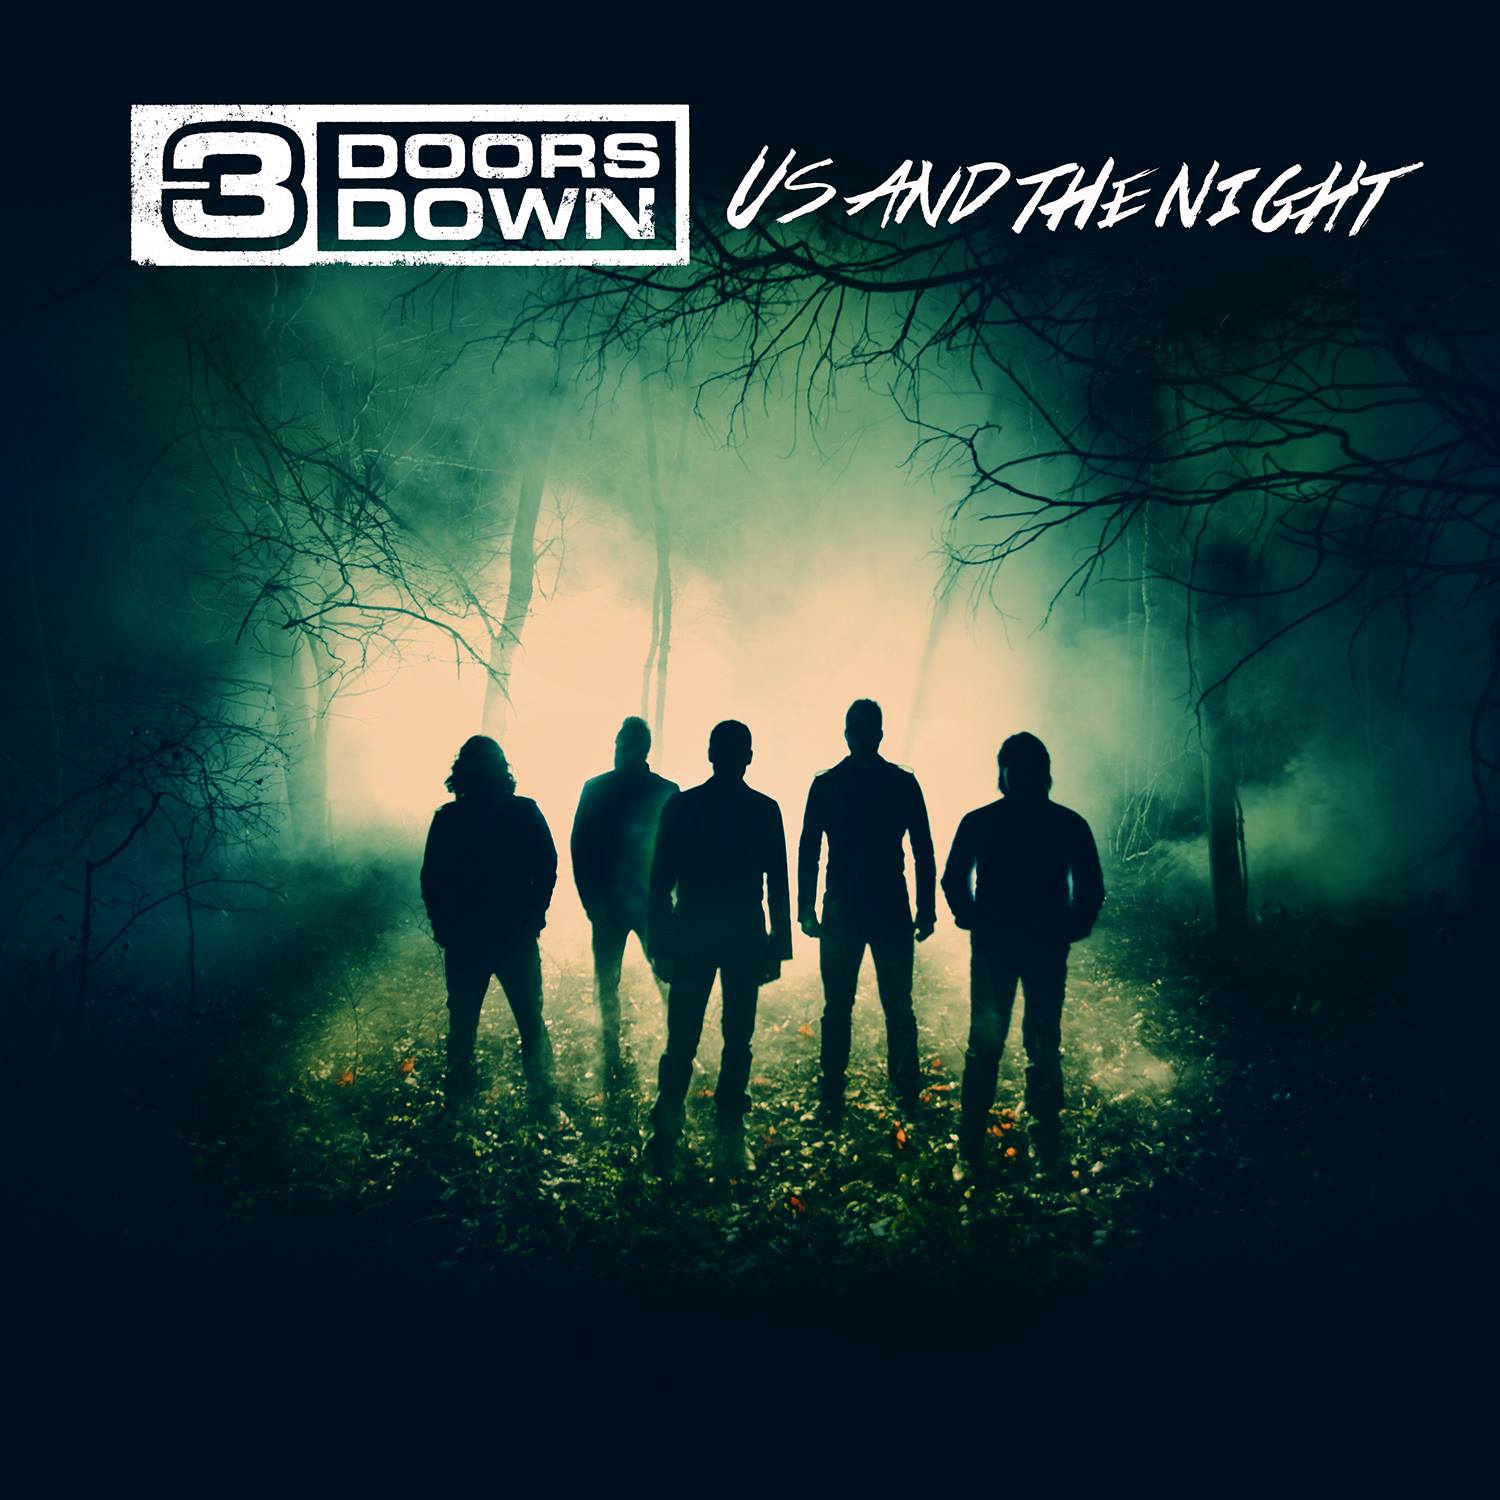 3 DOORS DOWN ANNOUNCE NEW STUDIO ALBUM 'US AND THE NIGHT' The Rock